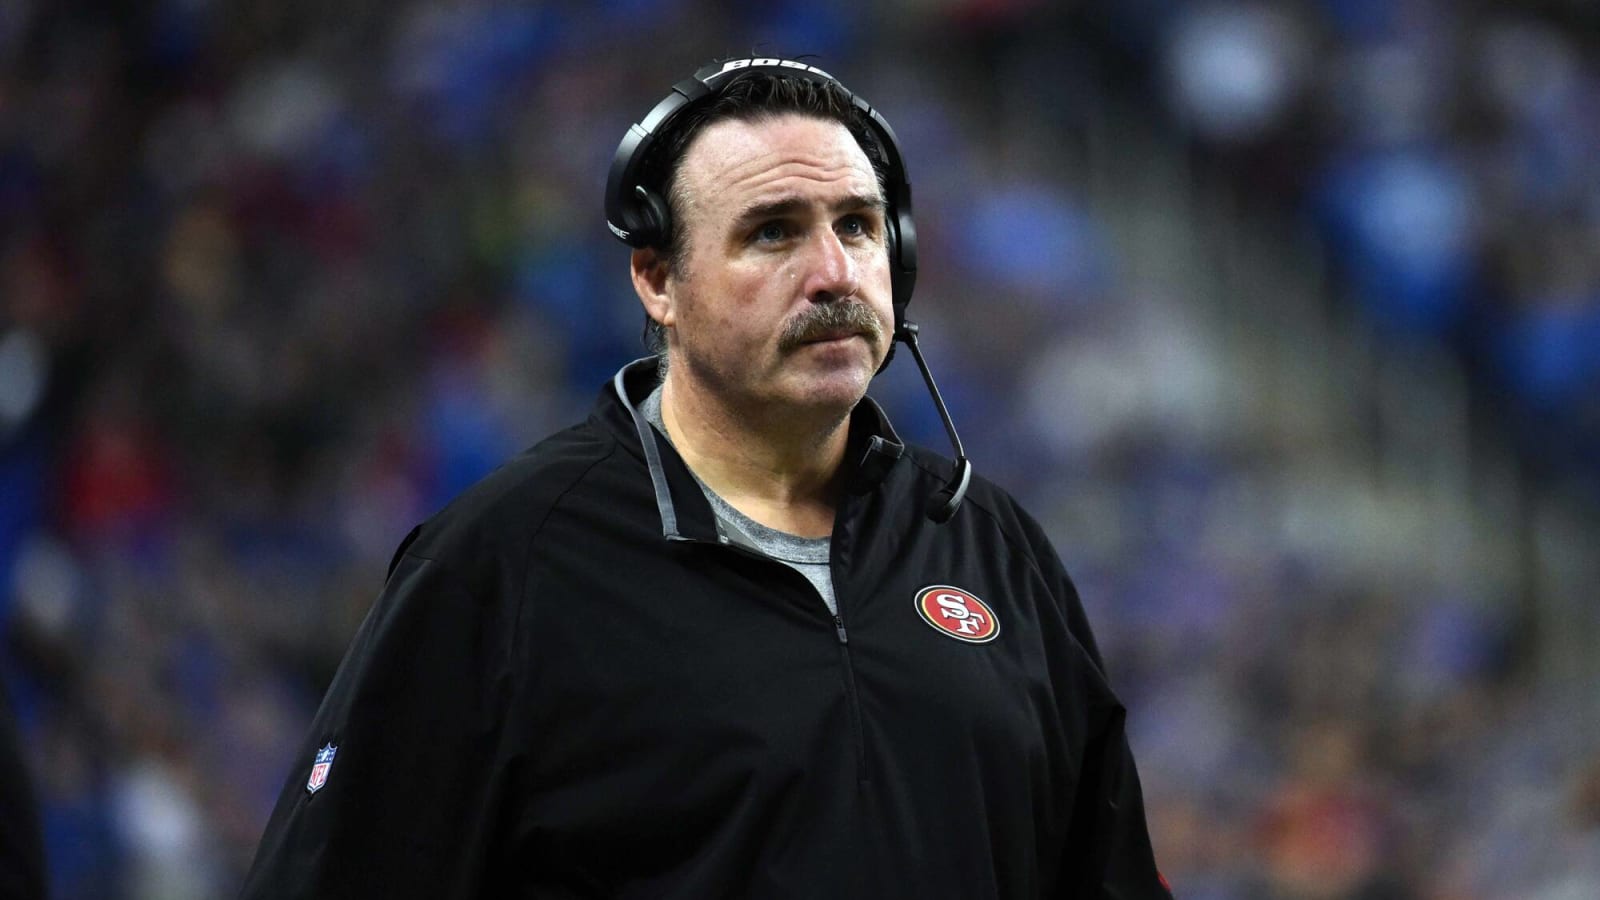 Ex-49ers coach Jim Tomsula named Coach of the Year after guiding Rhein Fire to European championship